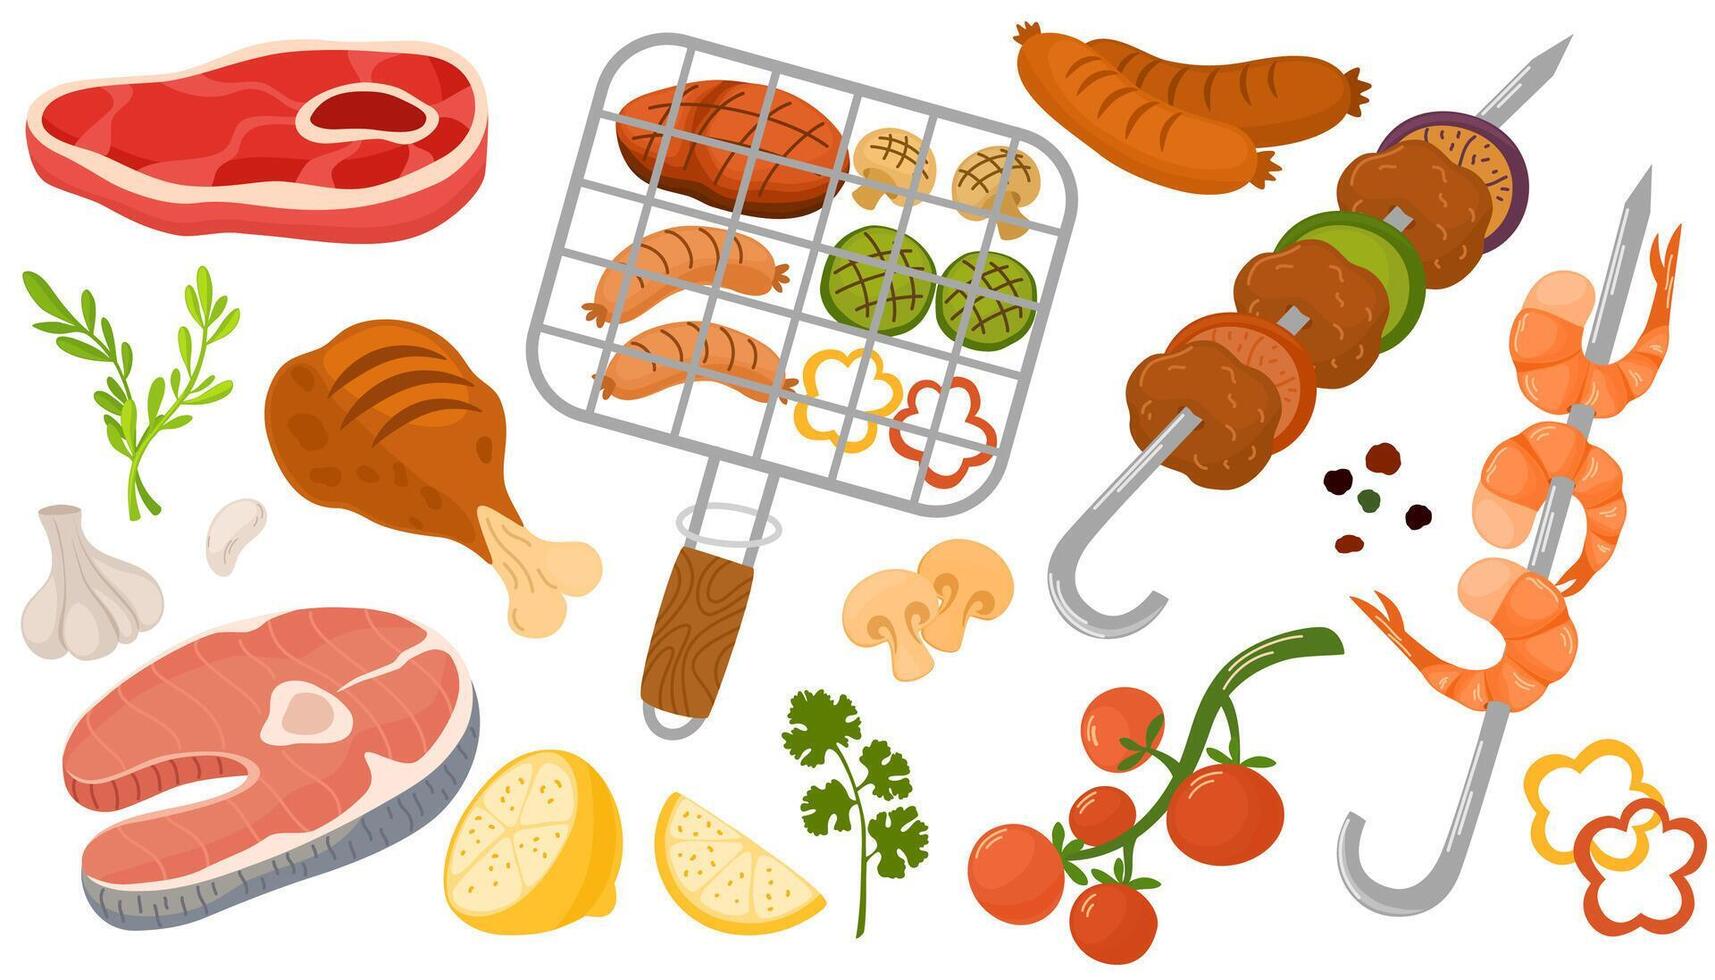 Grilled food for BBQ party or summer picnic. Collection of barbecue meat, chicken, sausages, vegetables, roasted steak, fish and kebab on skewer. Flat vector illustration isolated on white